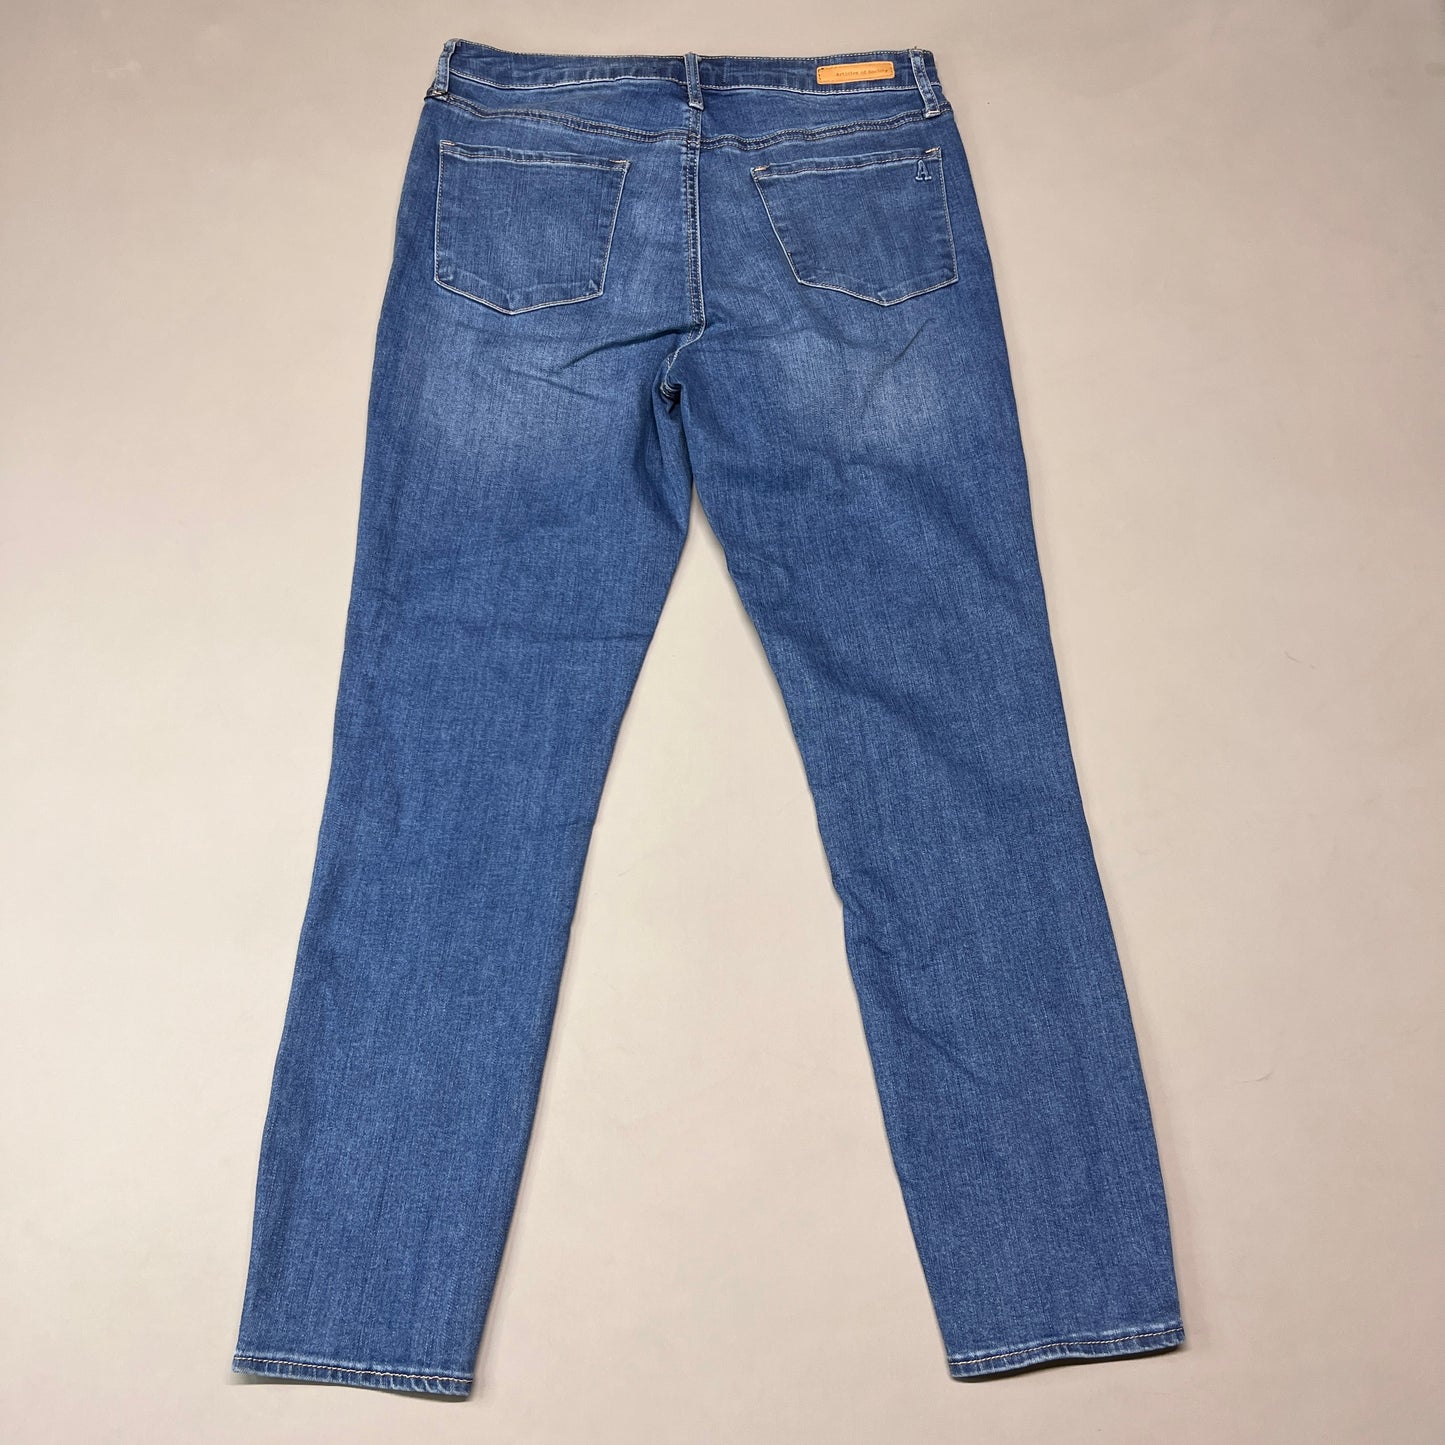 ARTICLES OF SOCIETY Pearl City Denim Jeans Women's Sz 29 Blue 4018PLV-712 (New)